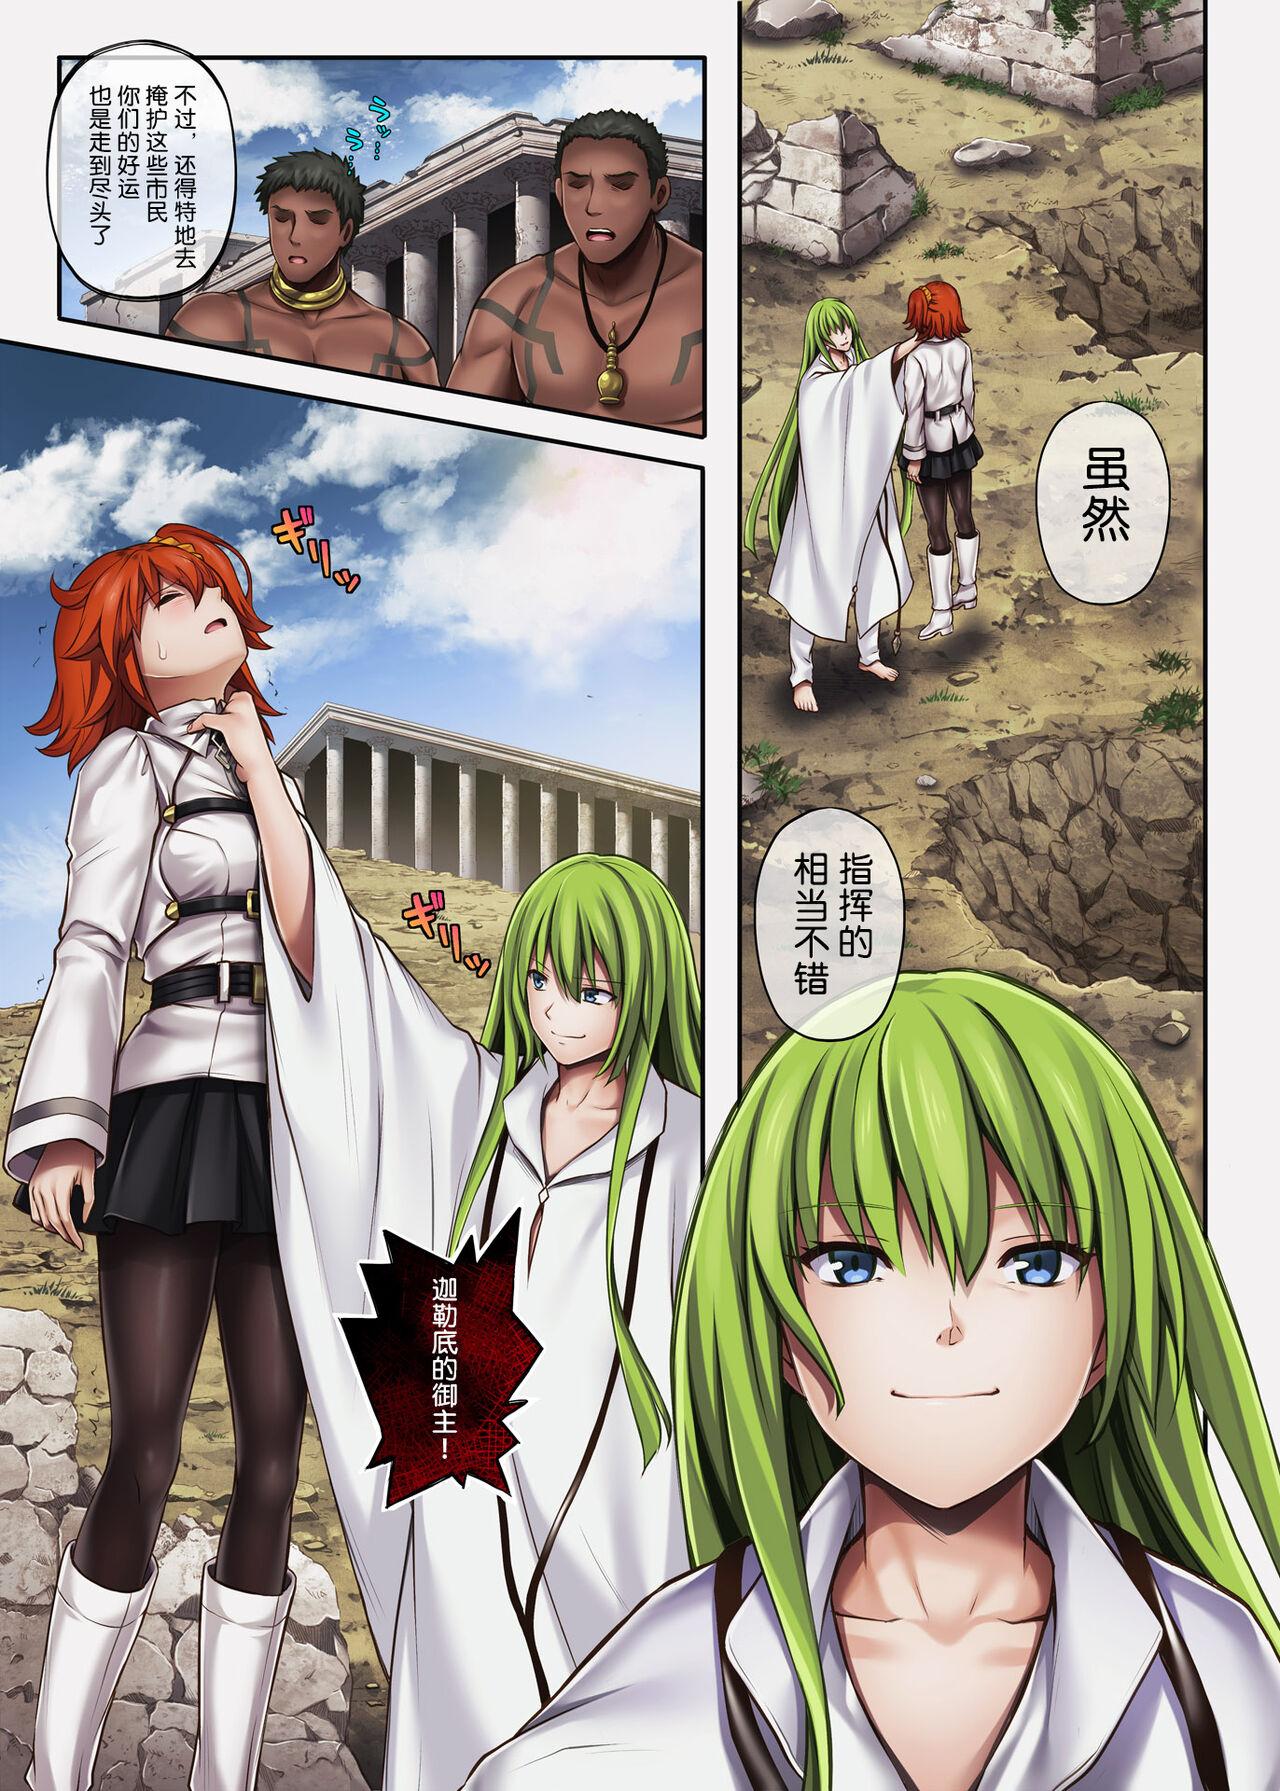 Italian Cyclone no Doujinshi Full Color Pack 4 - Fate grand order Pierced - Page 3